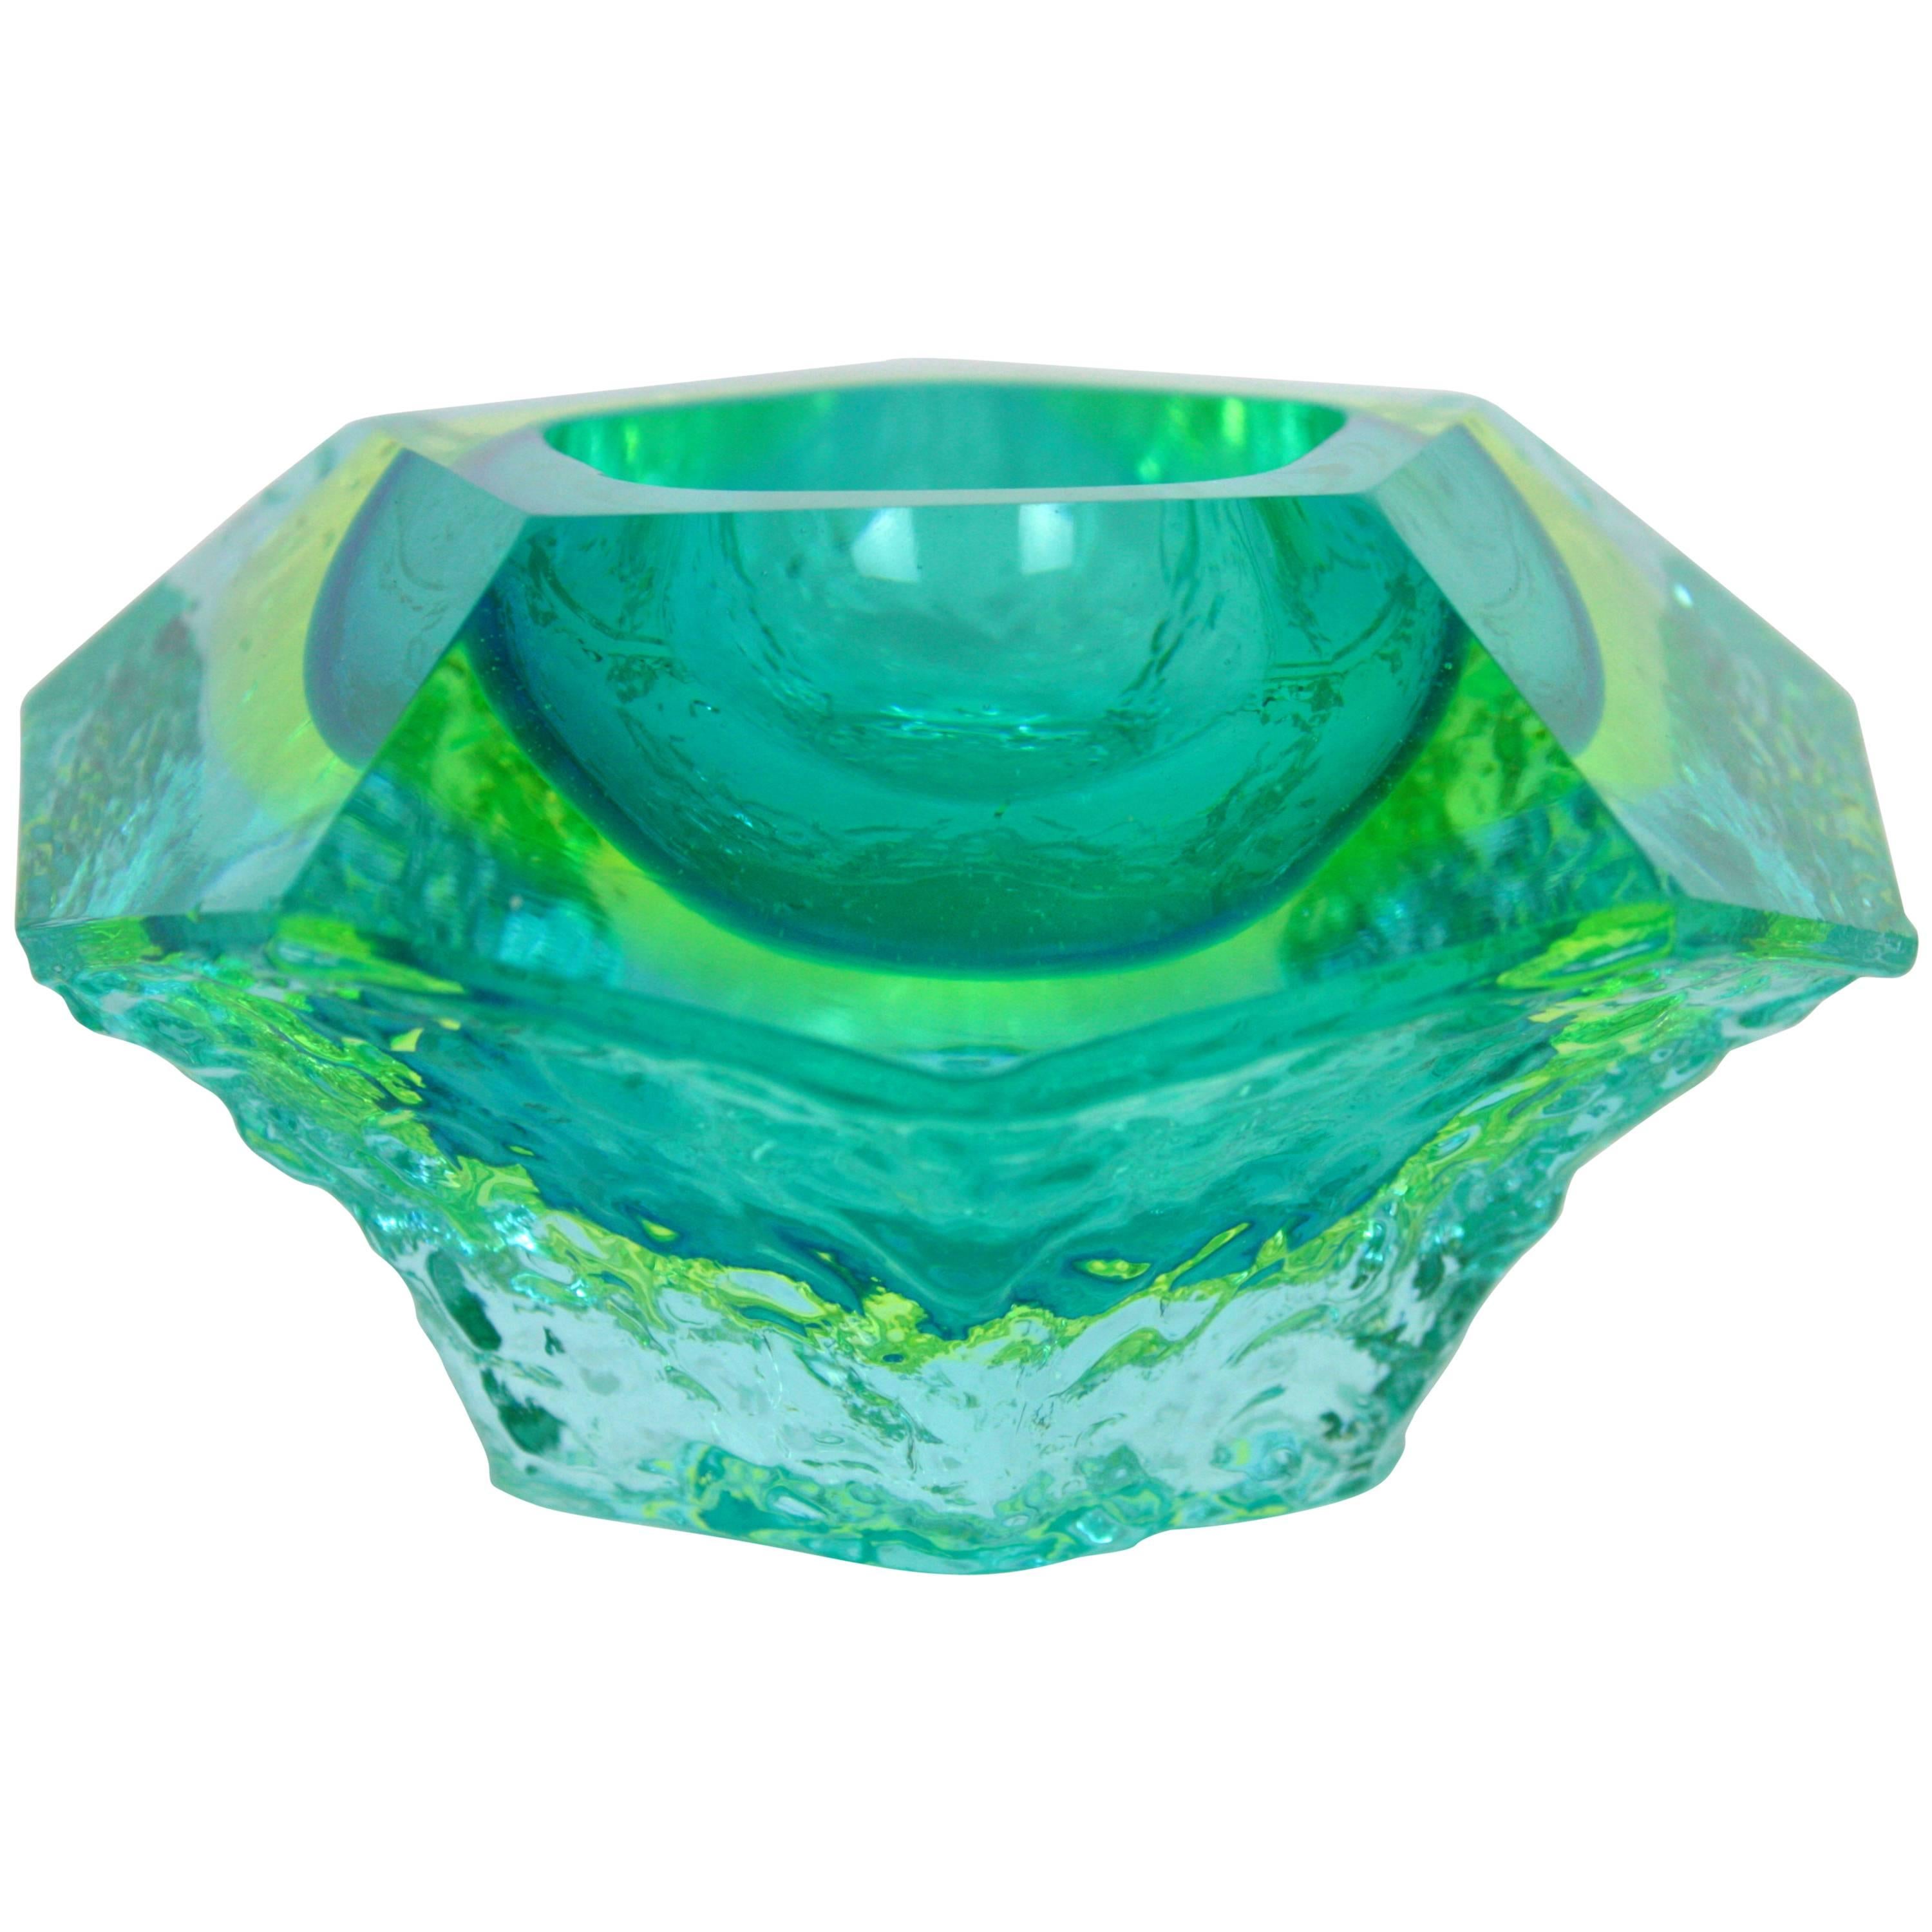 Mandruzzato Sommerso Mint Green Lime Blue Ice Glass Faceted Murano Bowl /Ashtray 4